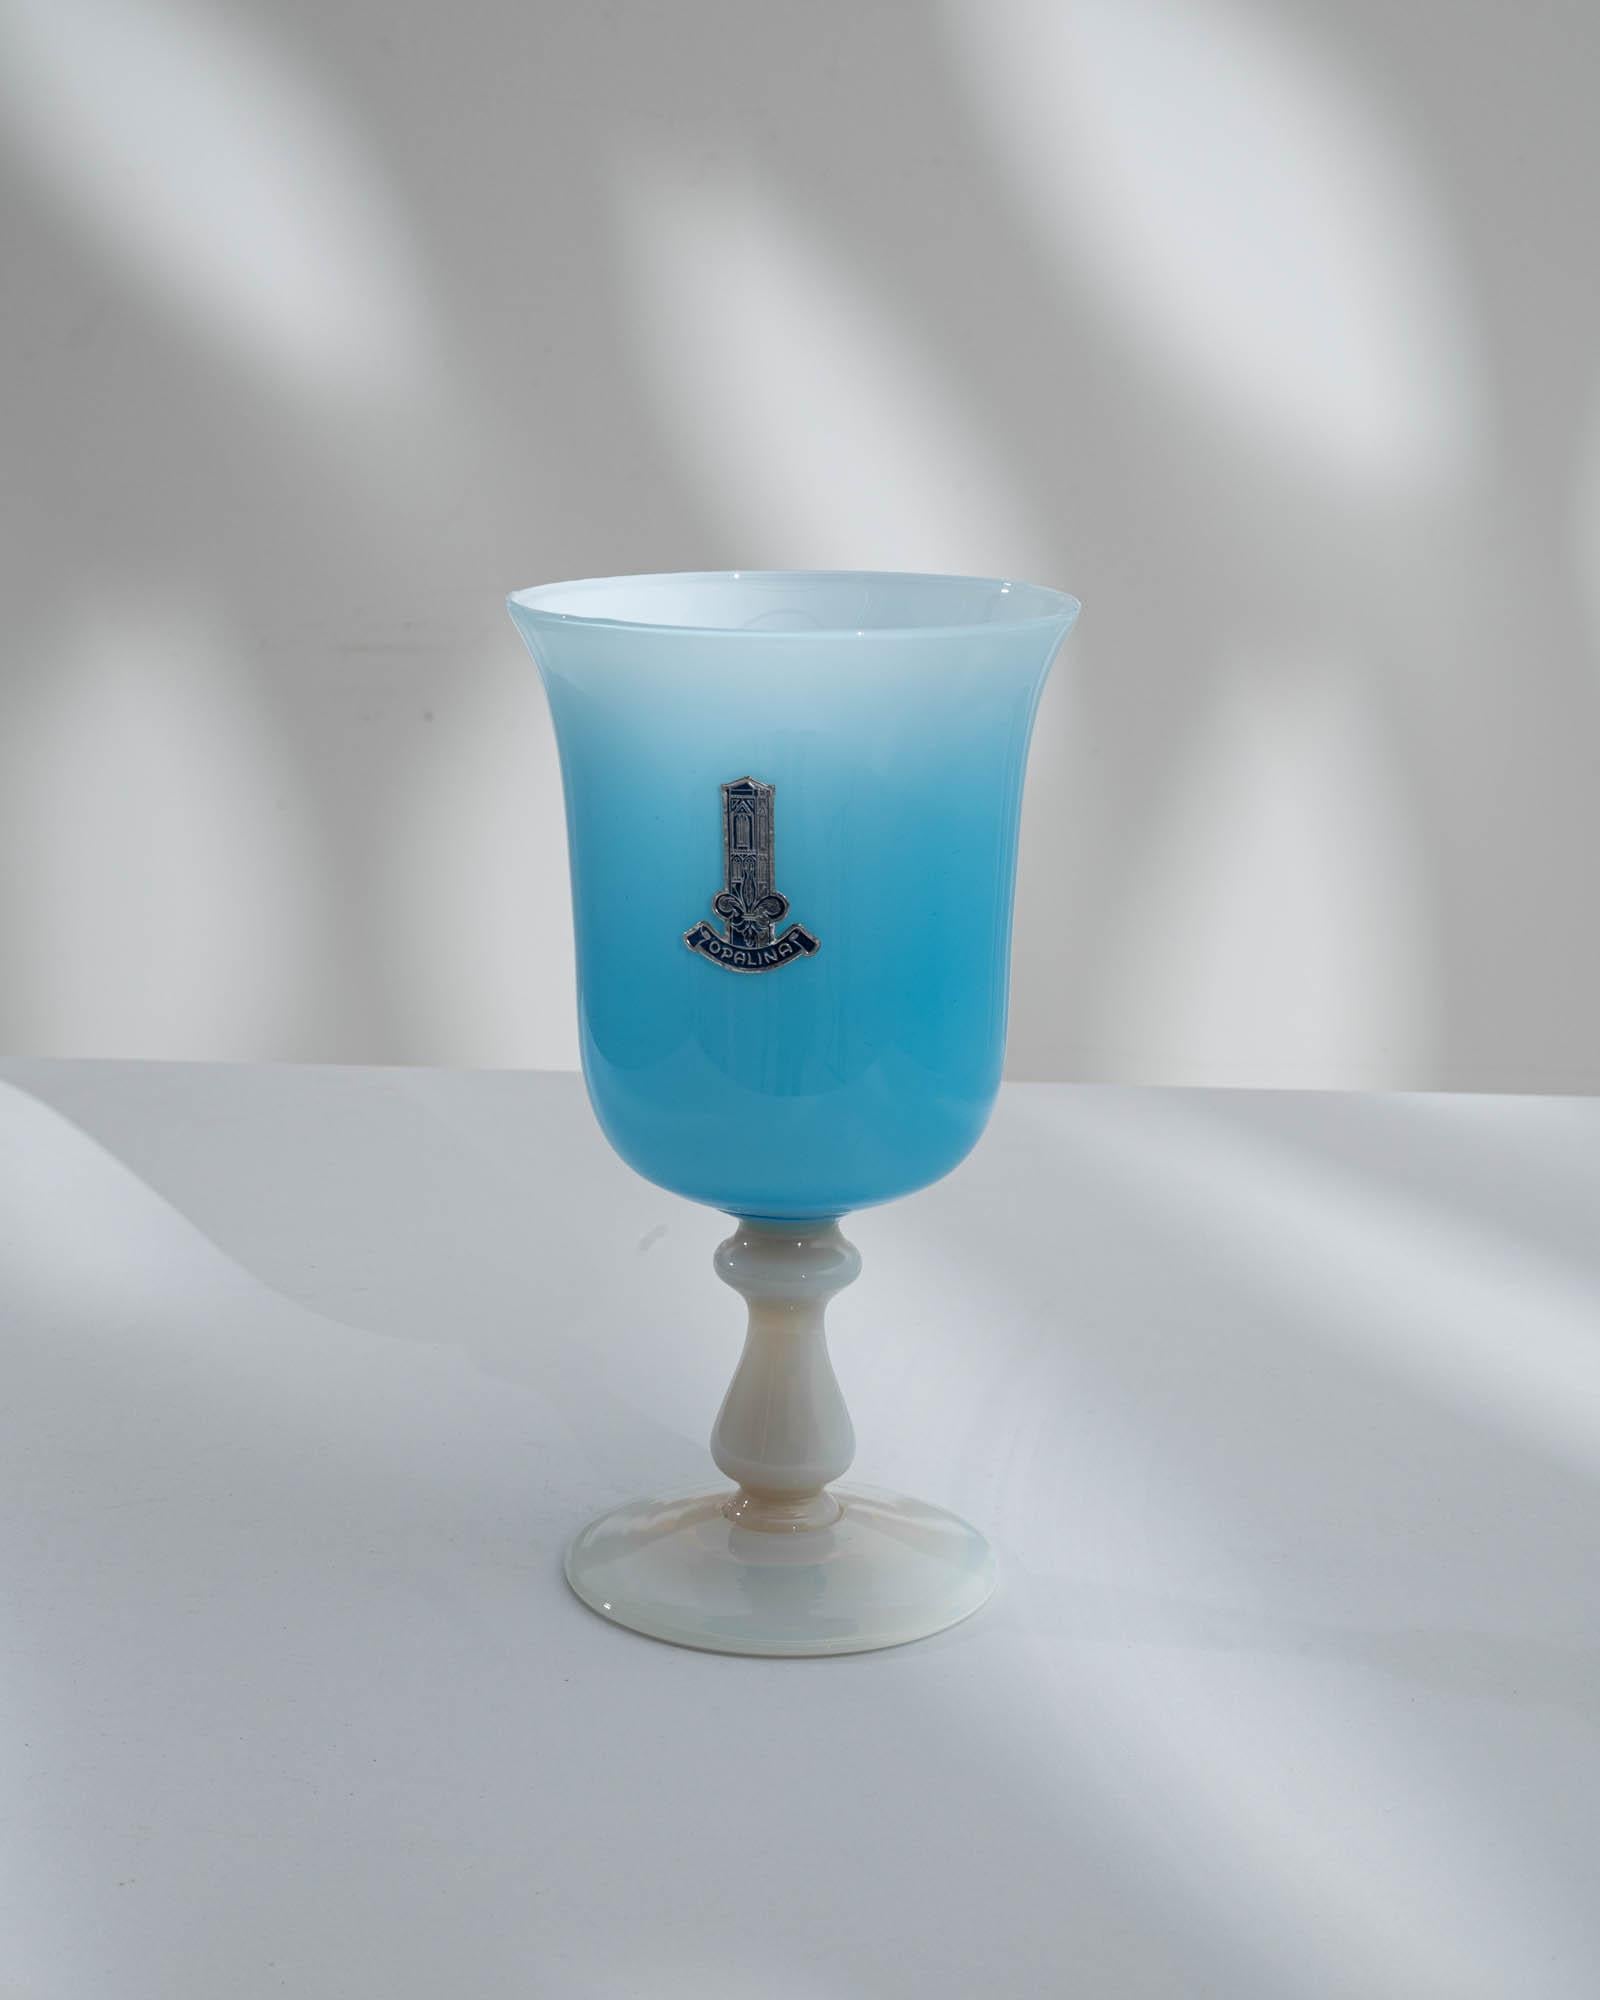 Crafted with finesse, this 20th-century Italian blue glass vase is a testament to Murano's renowned artistry. The vase features a stunning blue satin glass body, exuding an air of refinement and sophistication. Its white stem adds a contrasting